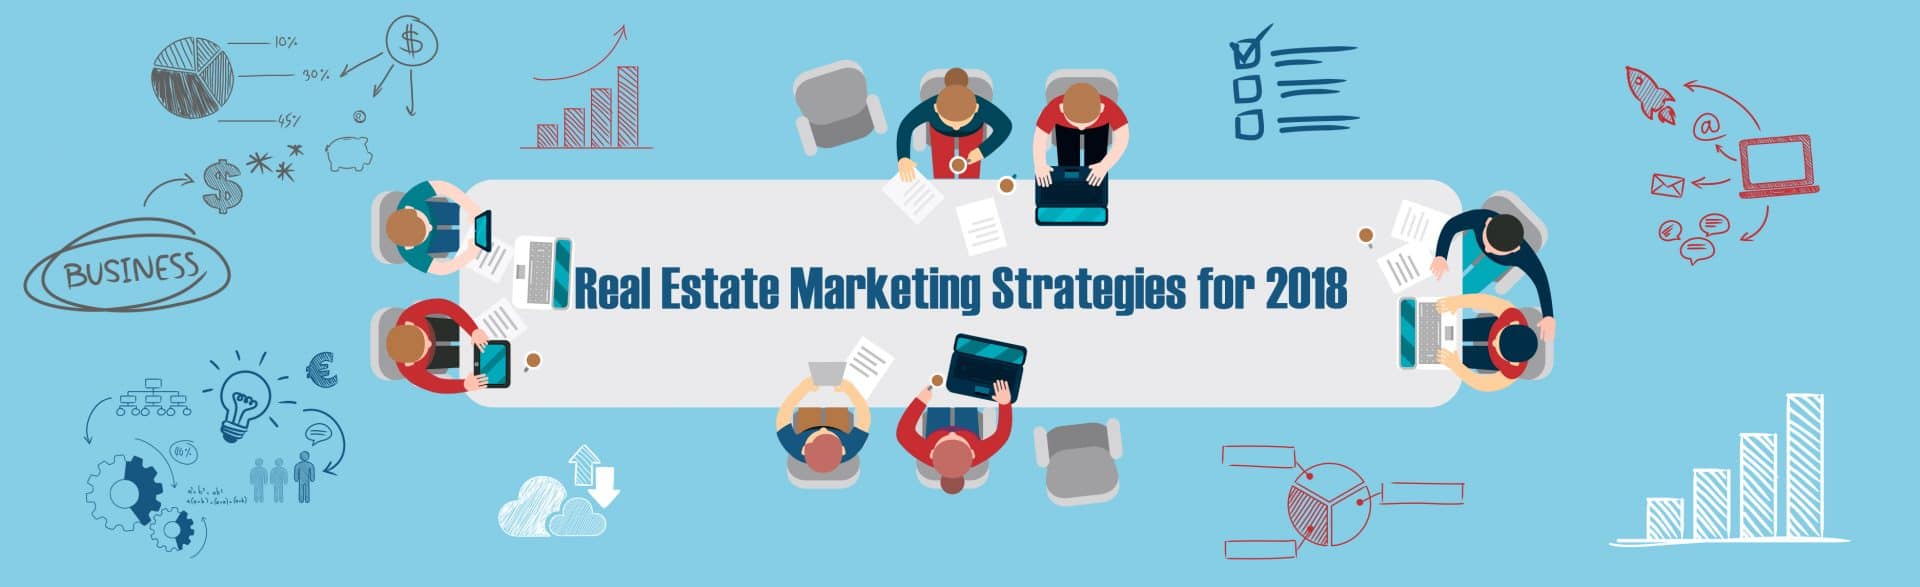 Real Estate Marketing Strategies for 2020